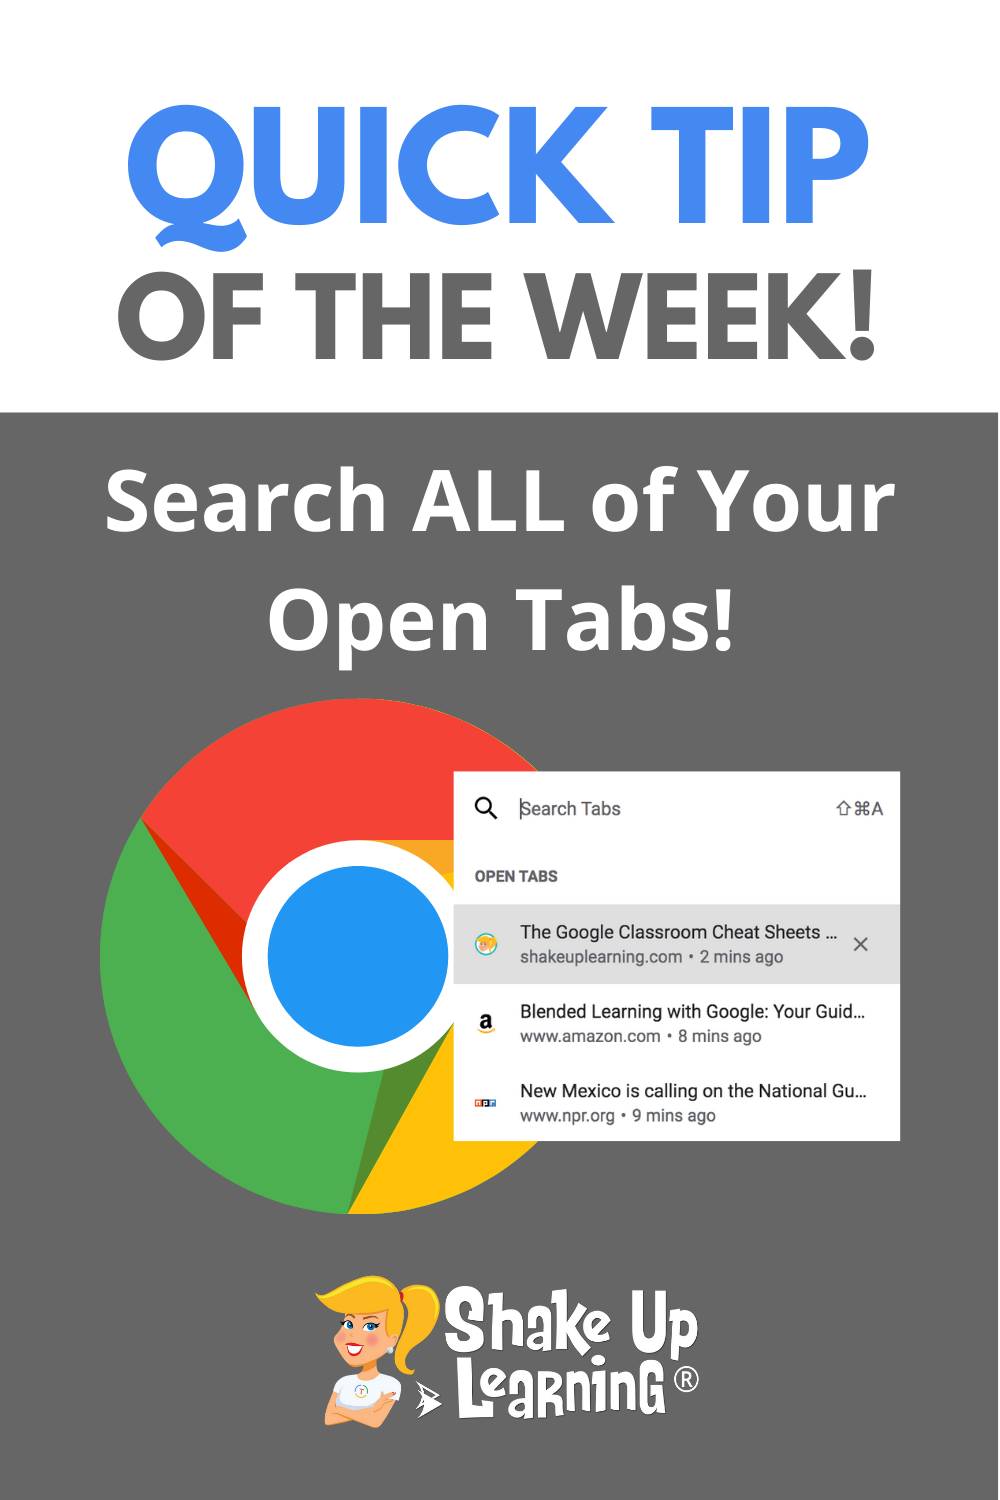 How to Search ALL Your Open Tabs in Google Chrome